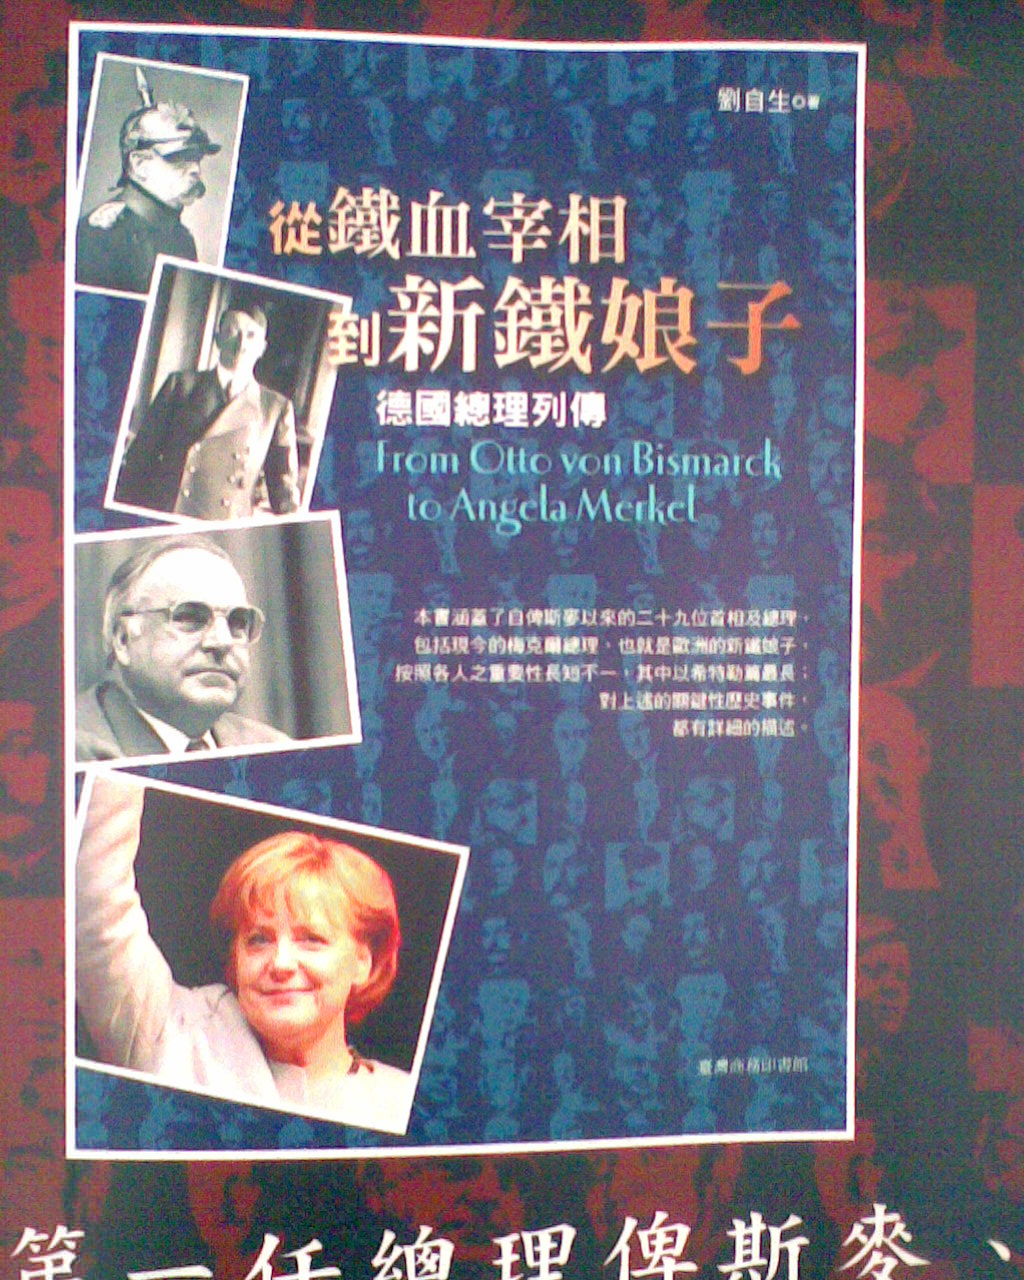 Chinese book German history